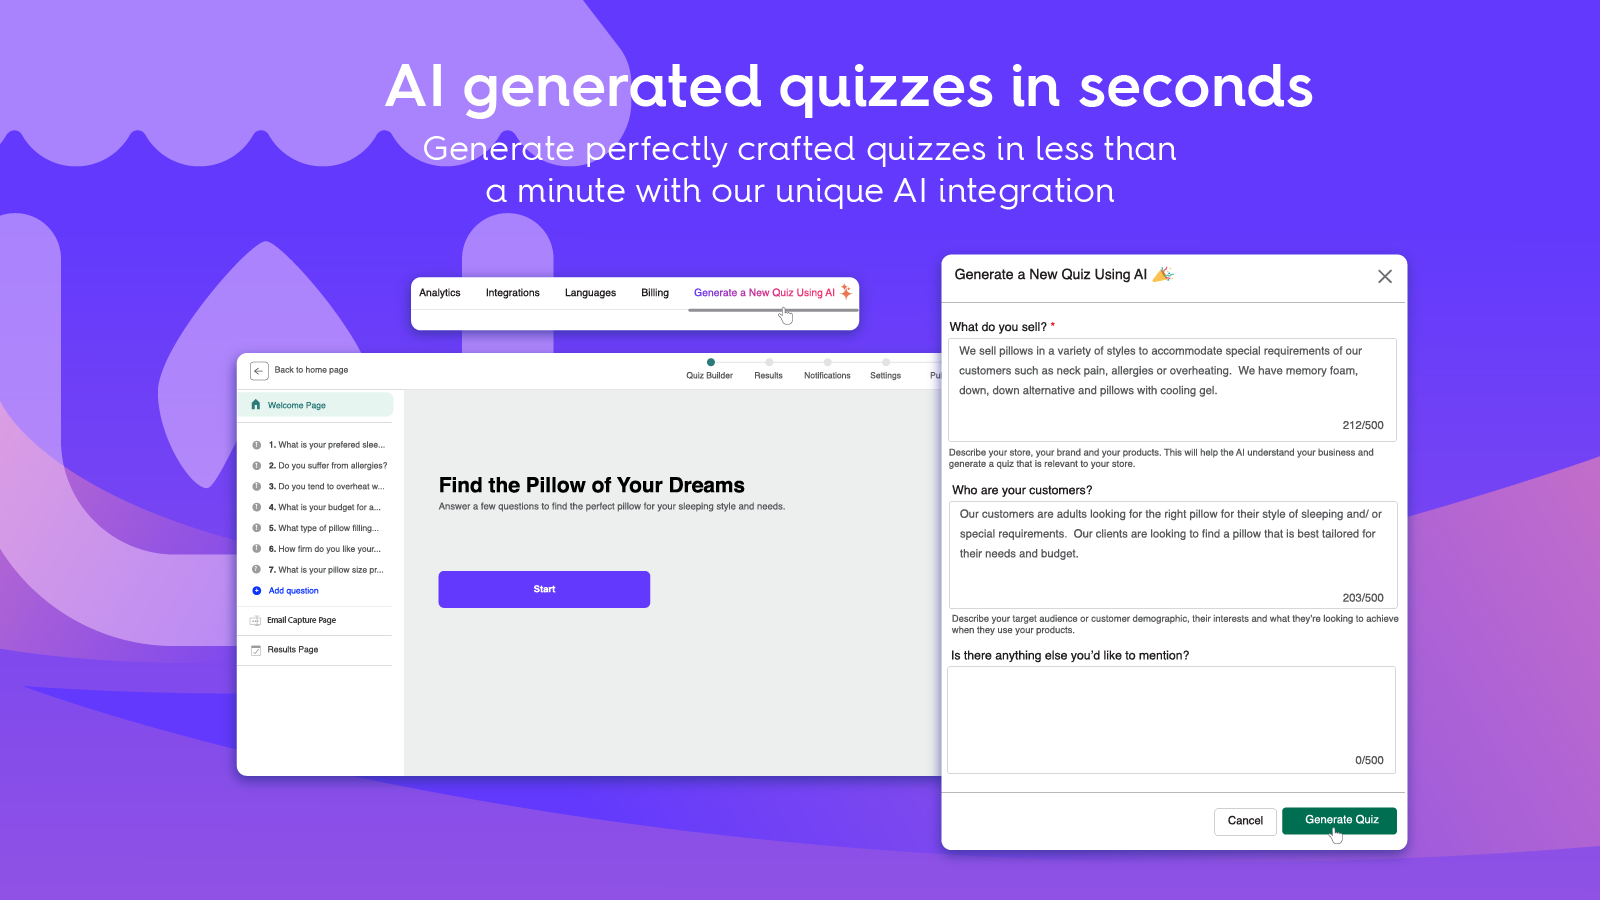 AI generated quizzes in less than a minute